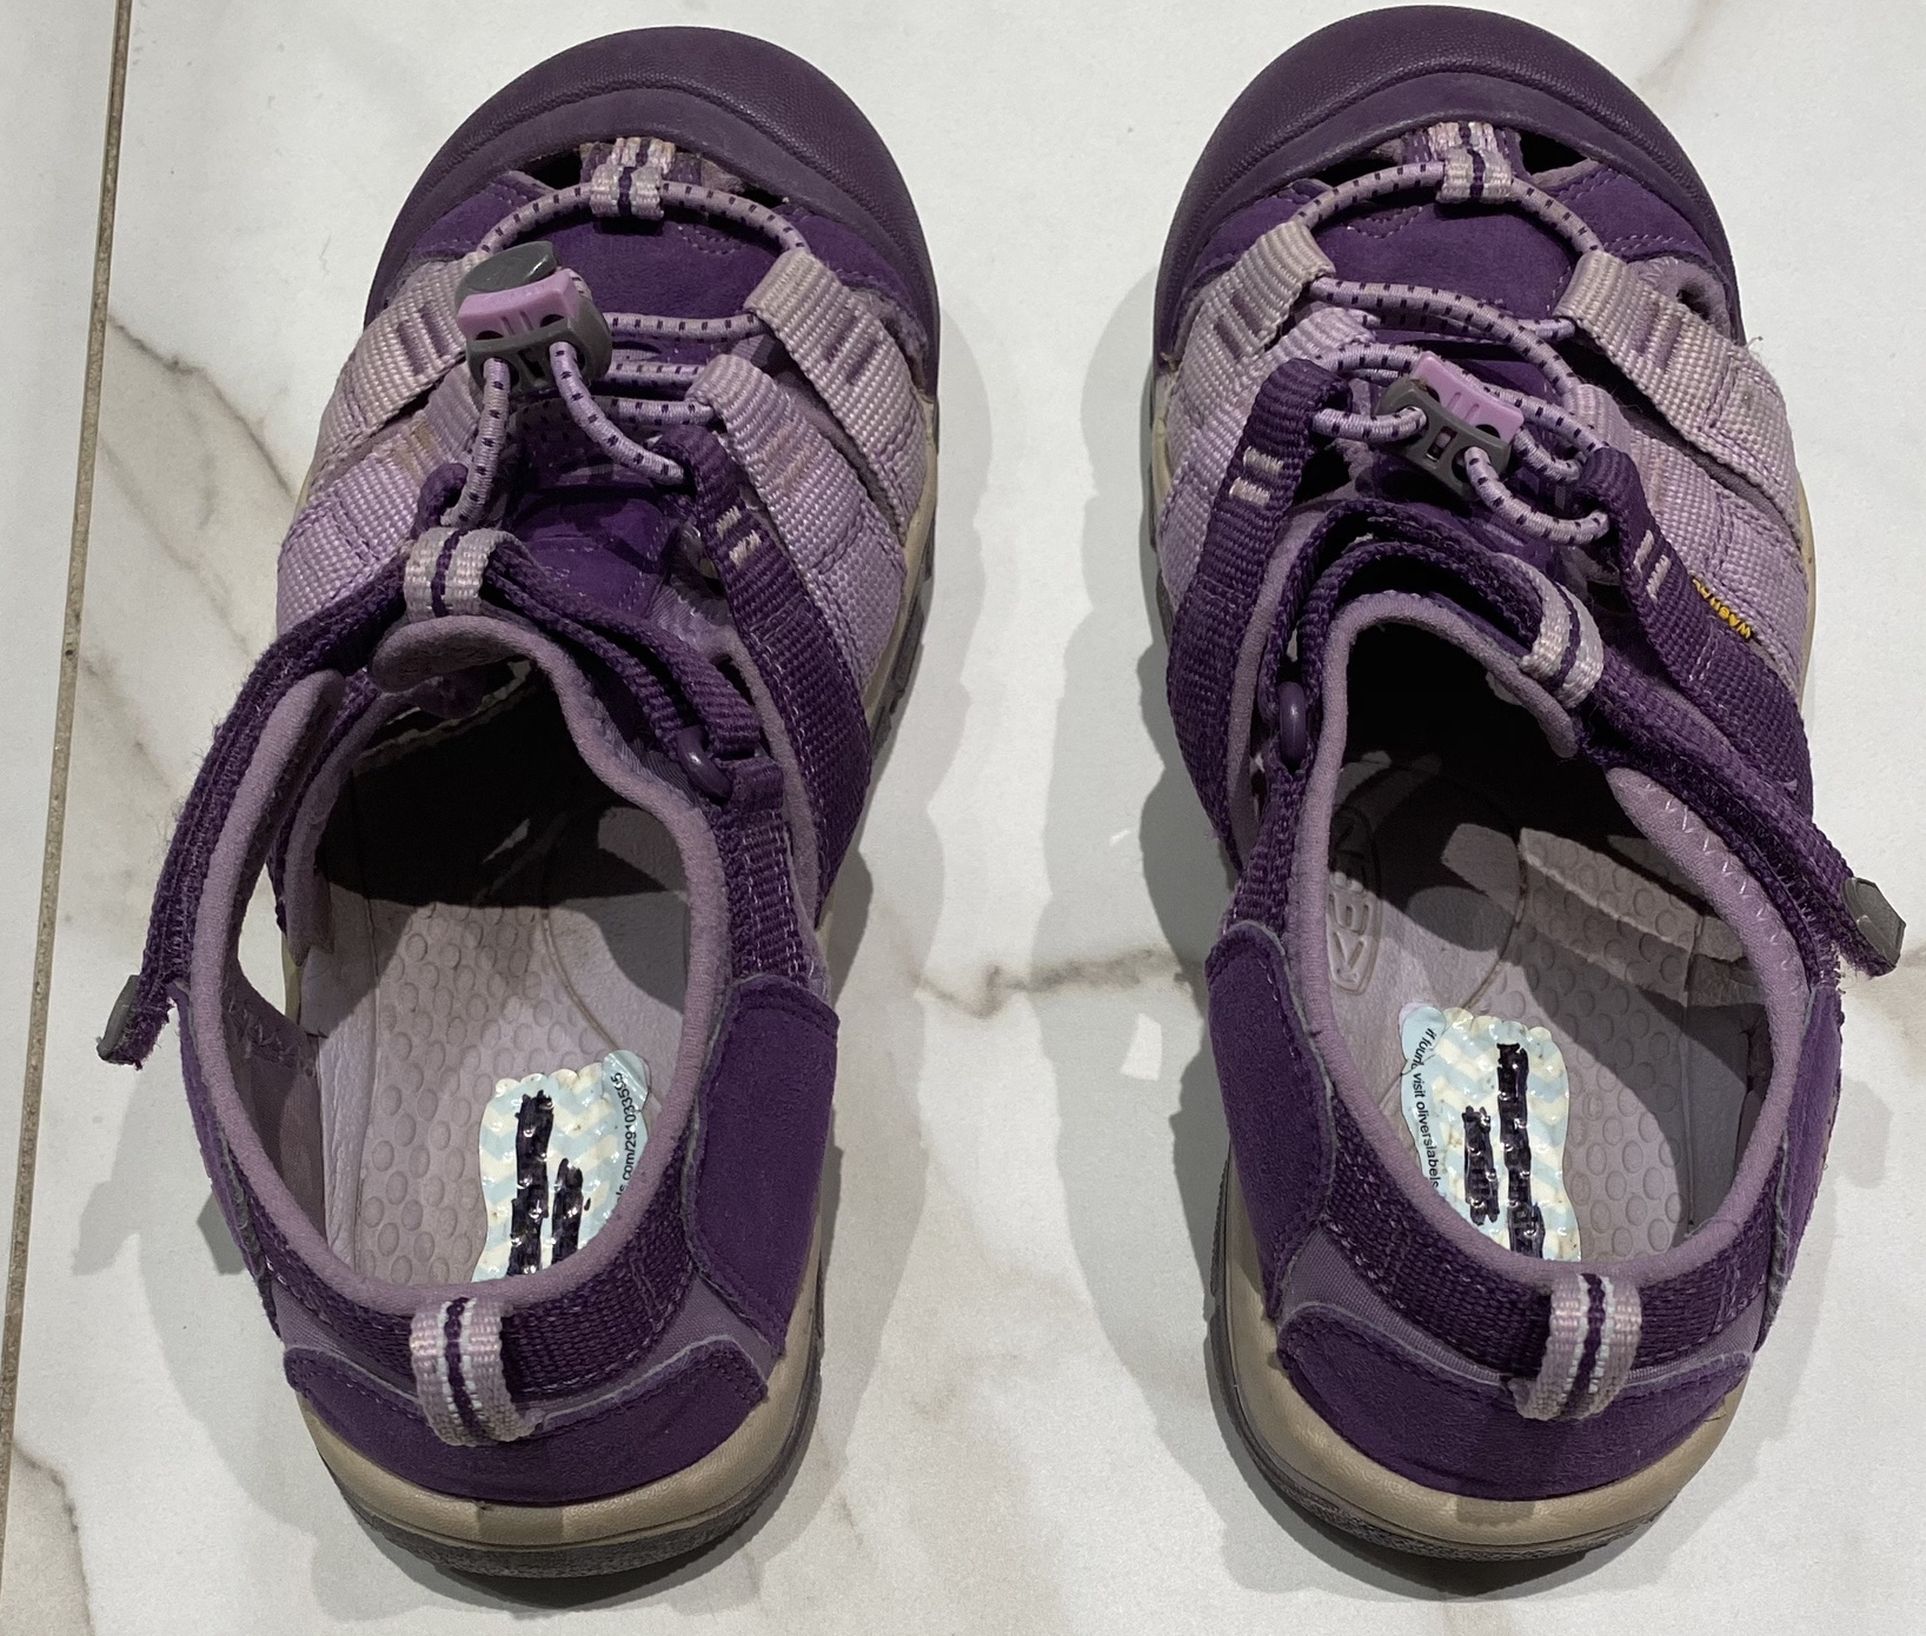 KEEN Youth Size 4 girls purple Hiking Trail Shoes. Condition is "Pre-owned". Shipped with USPS Priority Mail. Preowned and worn a handful of times.